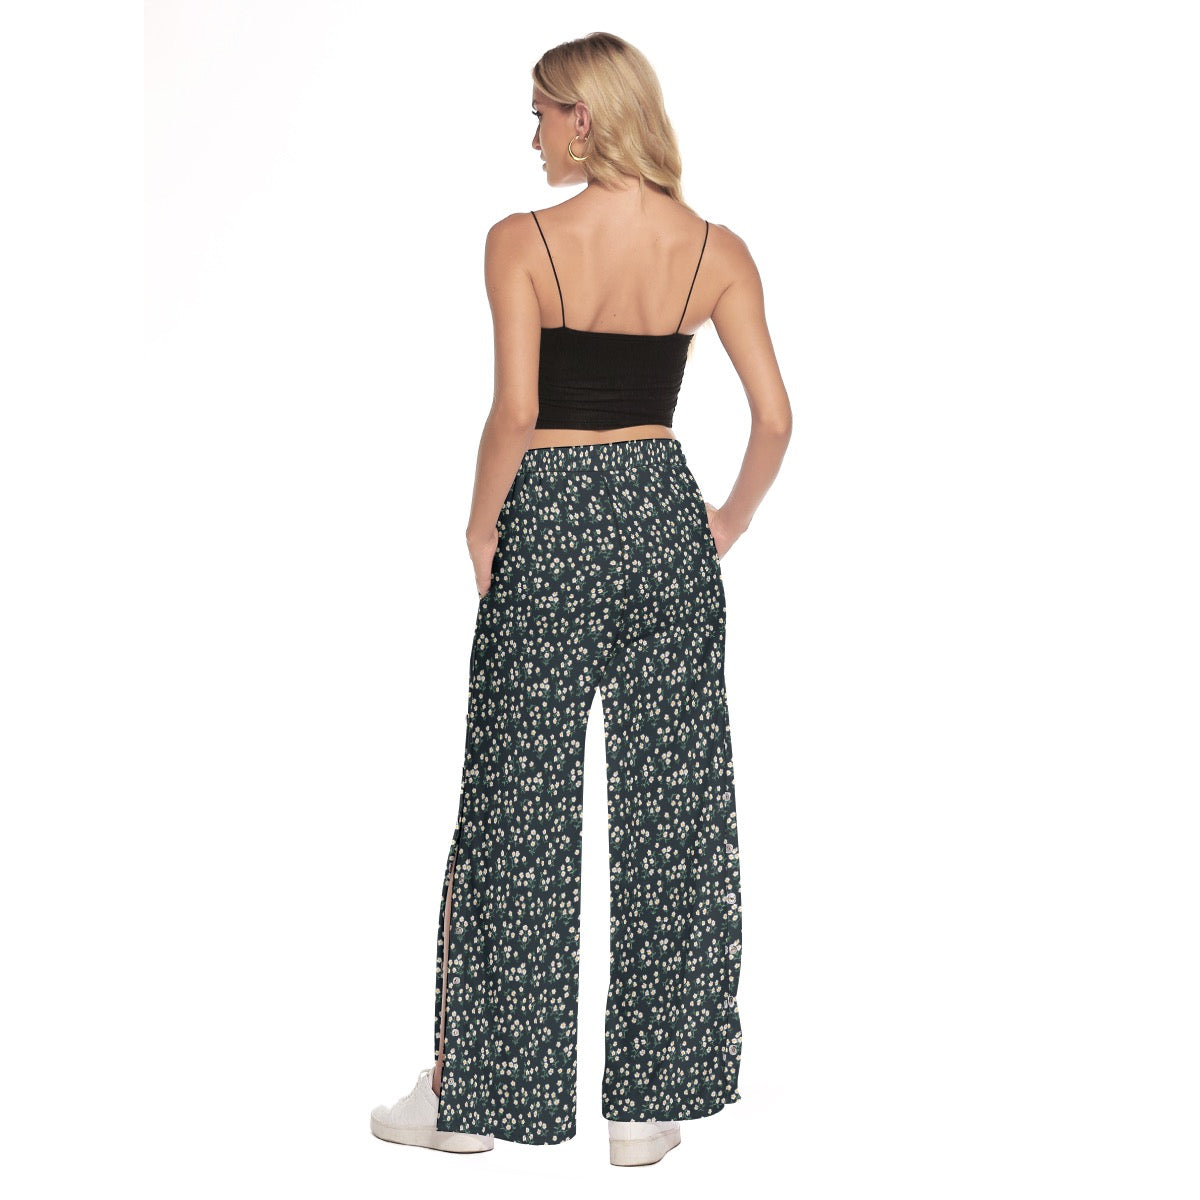 Super Bloom Little margaritas Side Slit Snap Button Trousers. Design hand-painted by the Designer Ma